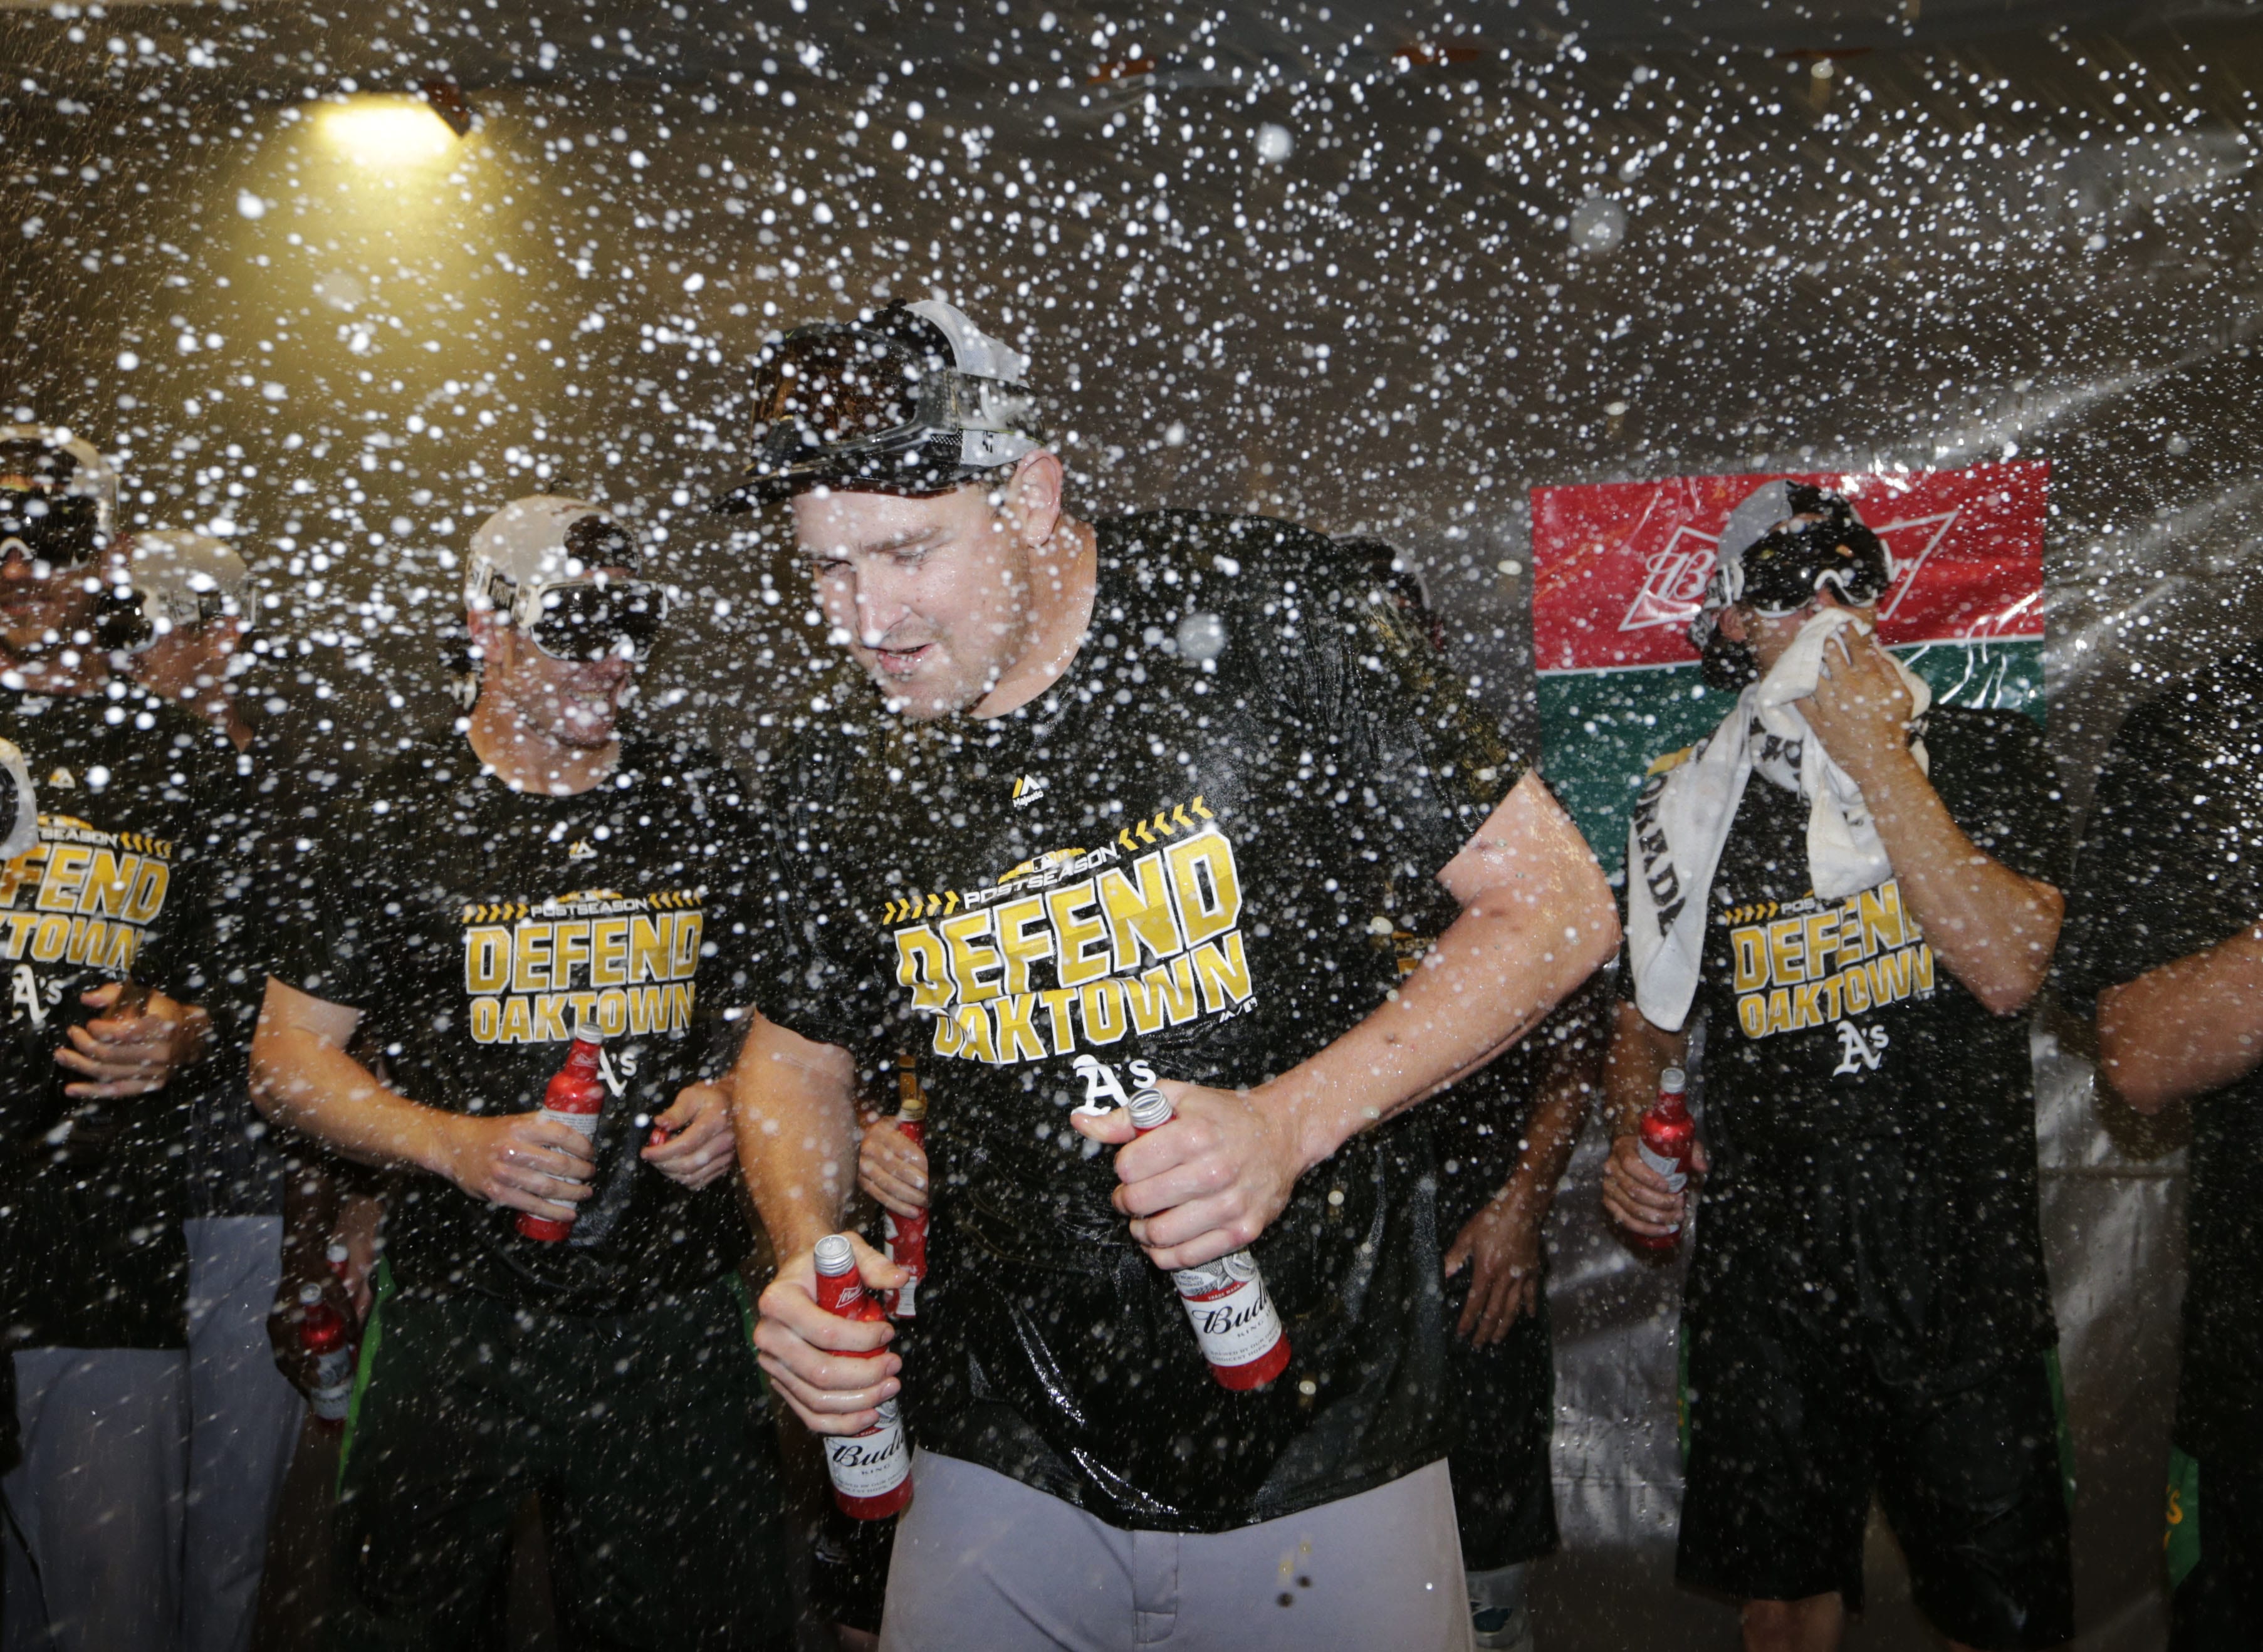 A's clinch playoff berth, then beat Mariners 7-3 - The Columbian